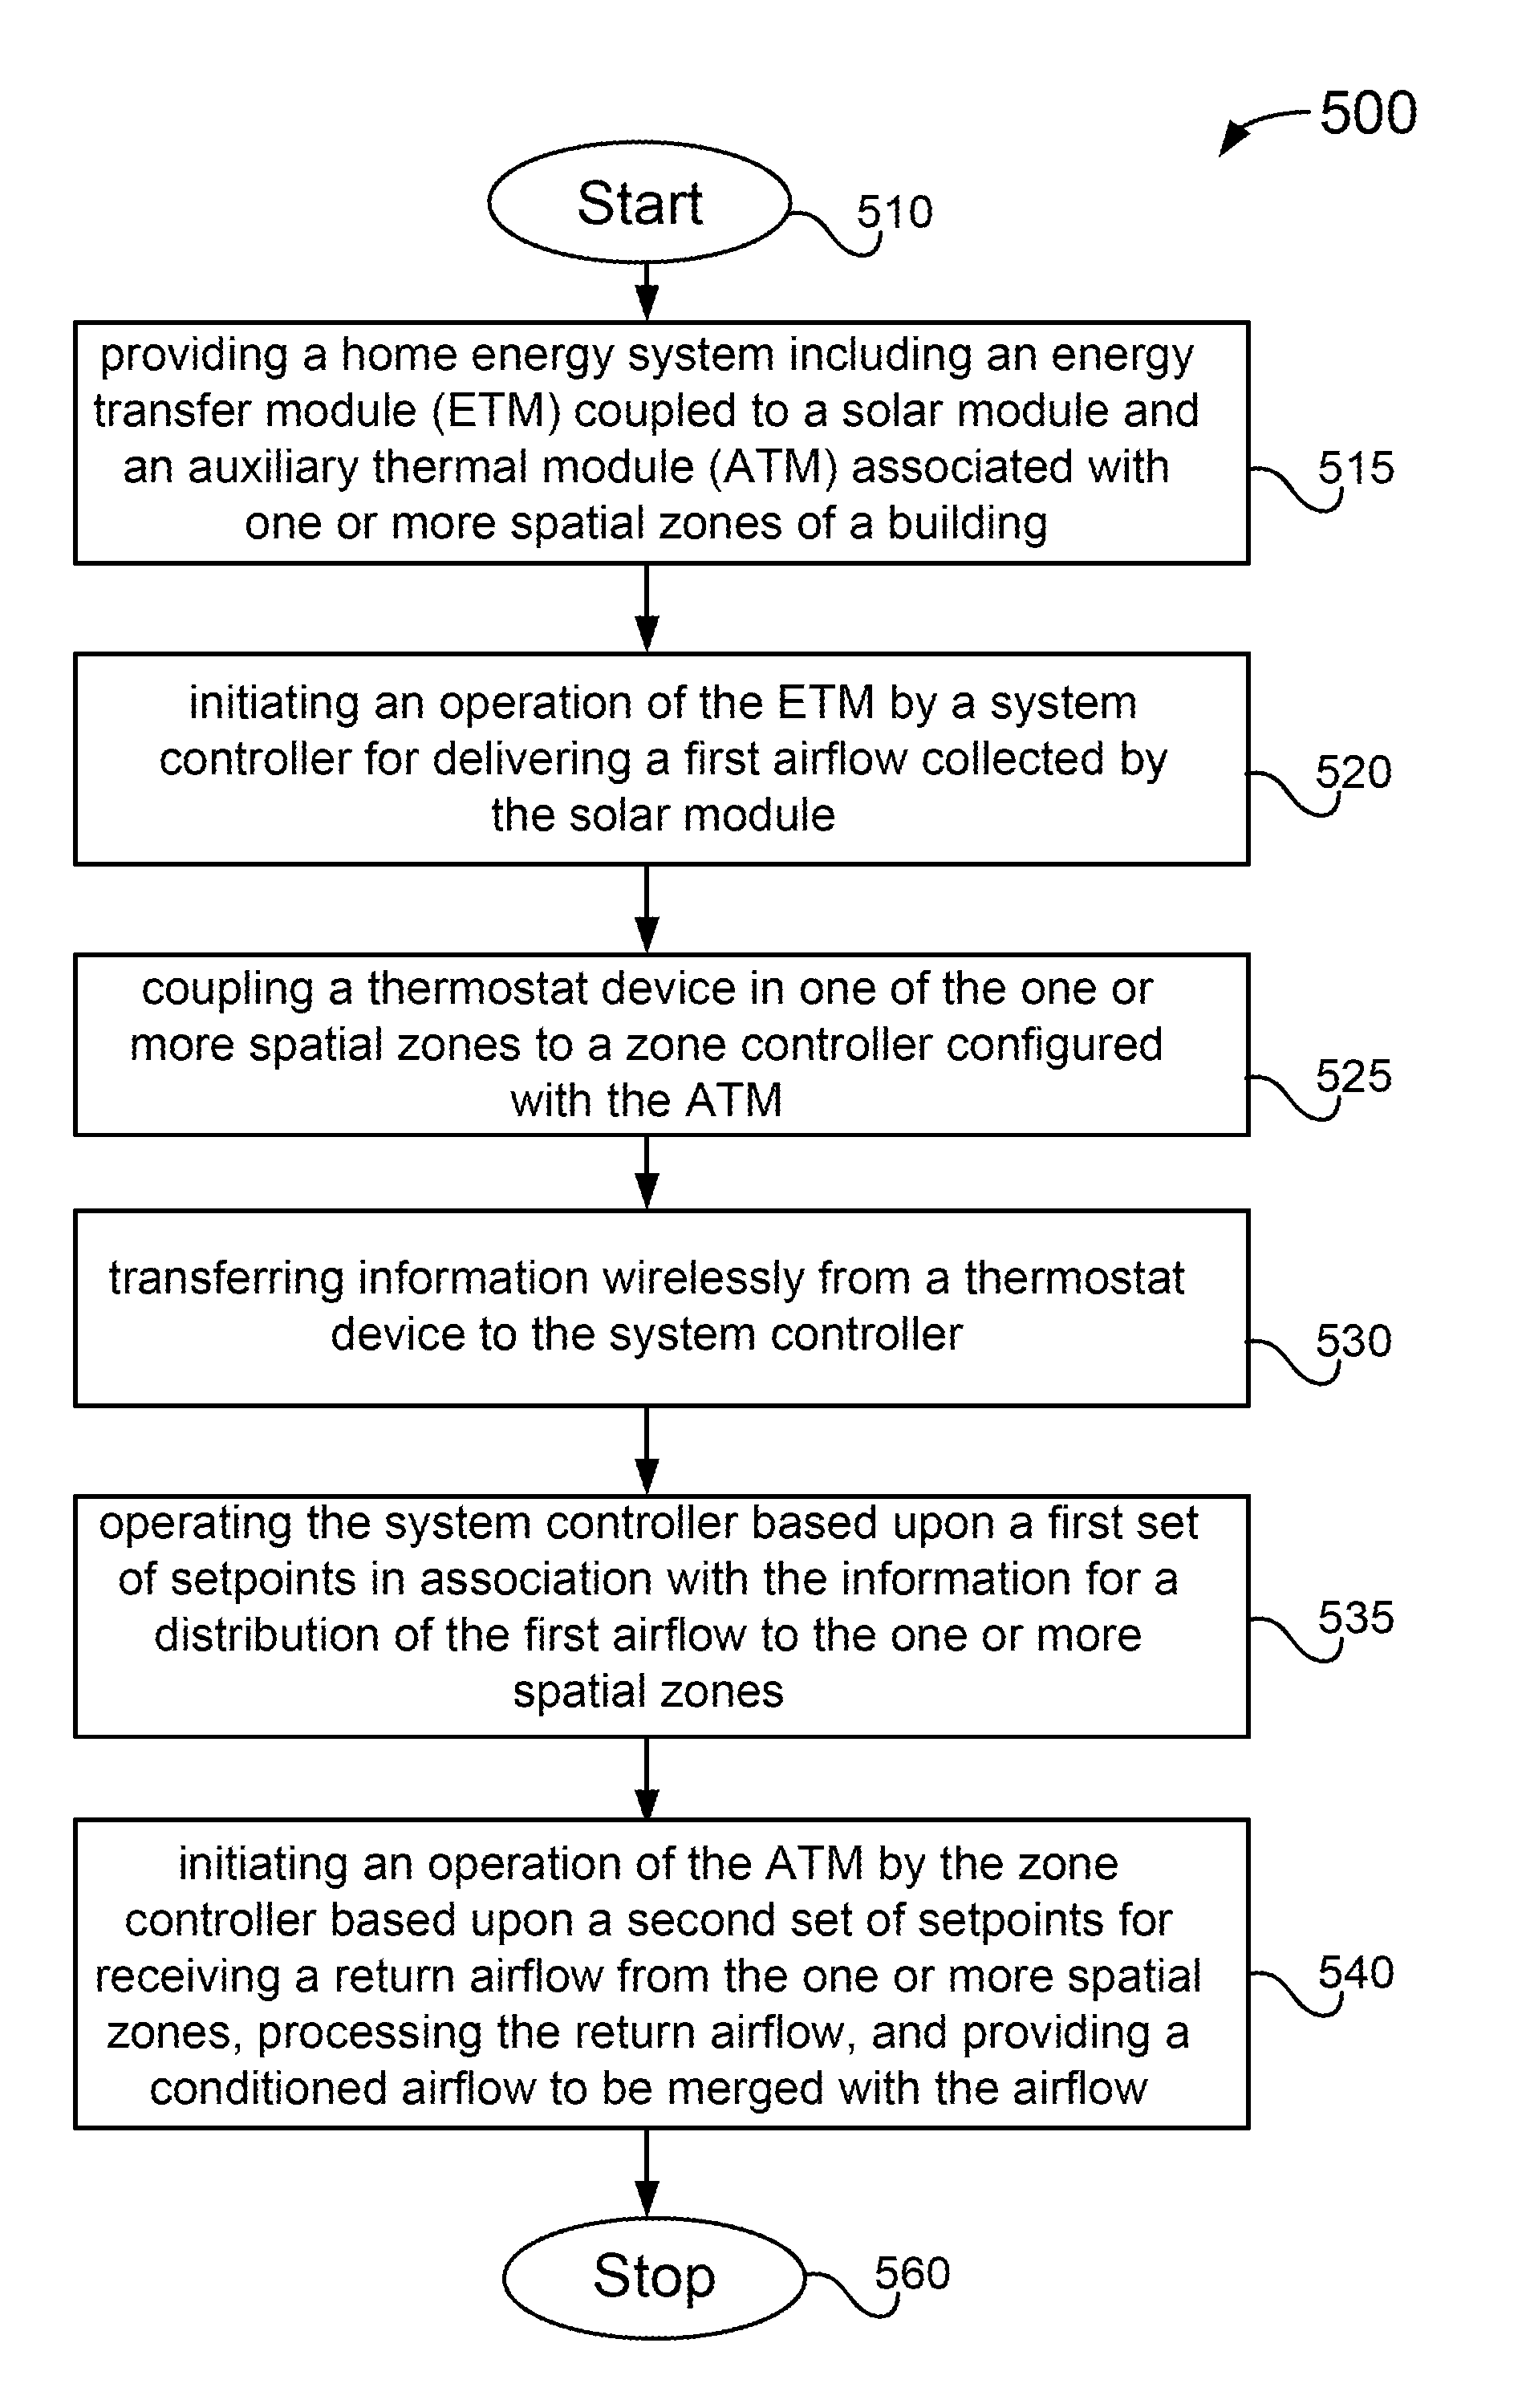 Method and system for healthy home zoning control configured for efficient energy use and conservation of energy resources